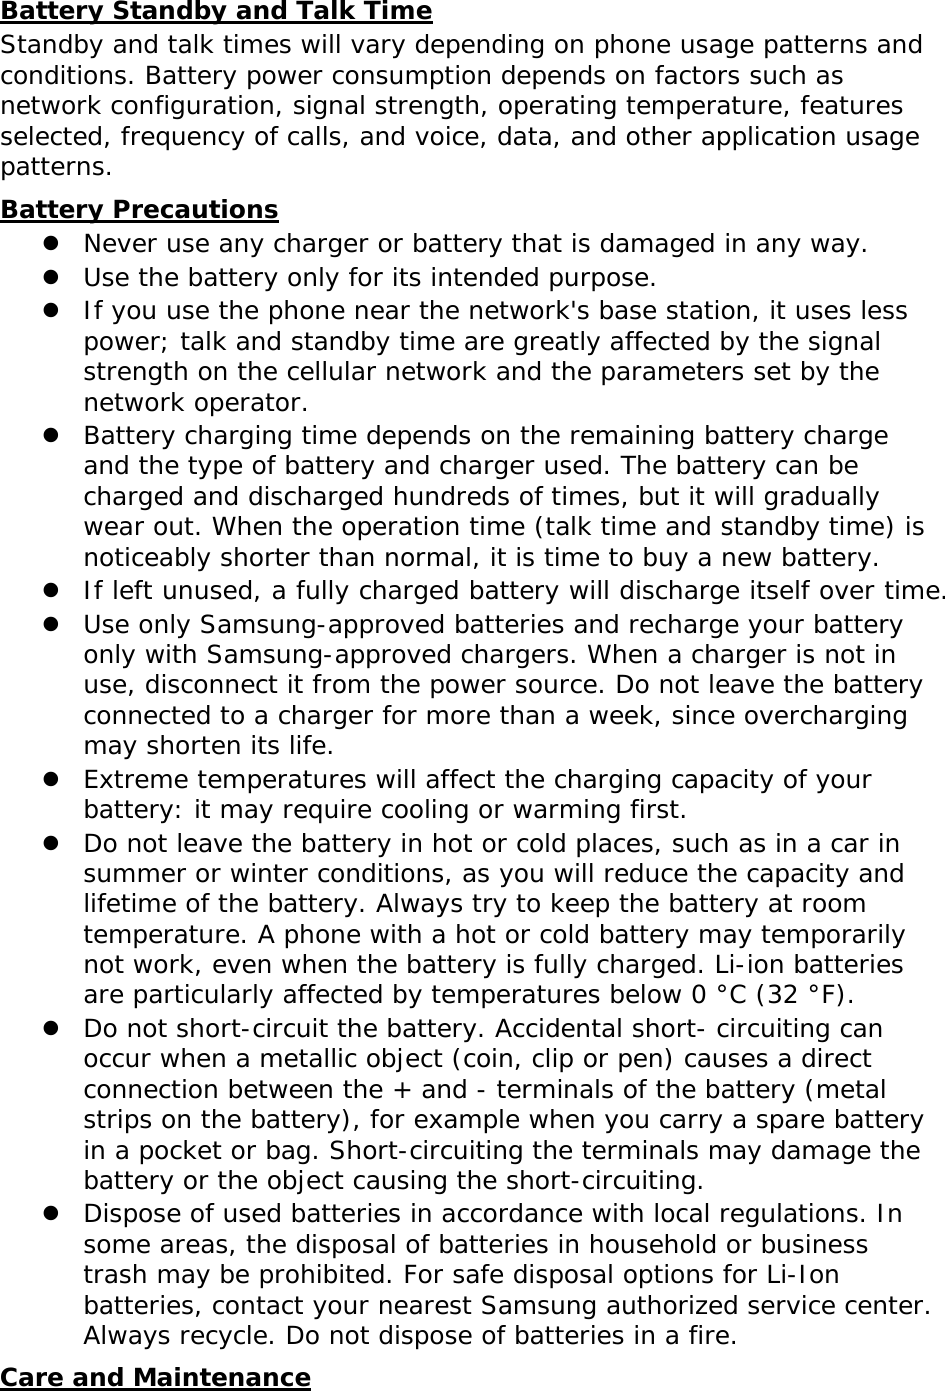 Battery Standby and Talk Time Standby and talk times will vary depending on phone usage patterns and conditions. Battery power consumption depends on factors such as network configuration, signal strength, operating temperature, features selected, frequency of calls, and voice, data, and other application usage patterns.  Battery Precautions  Never use any charger or battery that is damaged in any way.  Use the battery only for its intended purpose.  If you use the phone near the network&apos;s base station, it uses less power; talk and standby time are greatly affected by the signal strength on the cellular network and the parameters set by the network operator.  Battery charging time depends on the remaining battery charge and the type of battery and charger used. The battery can be charged and discharged hundreds of times, but it will gradually wear out. When the operation time (talk time and standby time) is noticeably shorter than normal, it is time to buy a new battery.  If left unused, a fully charged battery will discharge itself over time.  Use only Samsung-approved batteries and recharge your battery only with Samsung-approved chargers. When a charger is not in use, disconnect it from the power source. Do not leave the battery connected to a charger for more than a week, since overcharging may shorten its life.  Extreme temperatures will affect the charging capacity of your battery: it may require cooling or warming first.  Do not leave the battery in hot or cold places, such as in a car in summer or winter conditions, as you will reduce the capacity and lifetime of the battery. Always try to keep the battery at room temperature. A phone with a hot or cold battery may temporarily not work, even when the battery is fully charged. Li-ion batteries are particularly affected by temperatures below 0 °C (32 °F).  Do not short-circuit the battery. Accidental short- circuiting can occur when a metallic object (coin, clip or pen) causes a direct connection between the + and - terminals of the battery (metal strips on the battery), for example when you carry a spare battery in a pocket or bag. Short-circuiting the terminals may damage the battery or the object causing the short-circuiting.  Dispose of used batteries in accordance with local regulations. In some areas, the disposal of batteries in household or business trash may be prohibited. For safe disposal options for Li-Ion batteries, contact your nearest Samsung authorized service center. Always recycle. Do not dispose of batteries in a fire. Care and Maintenance 